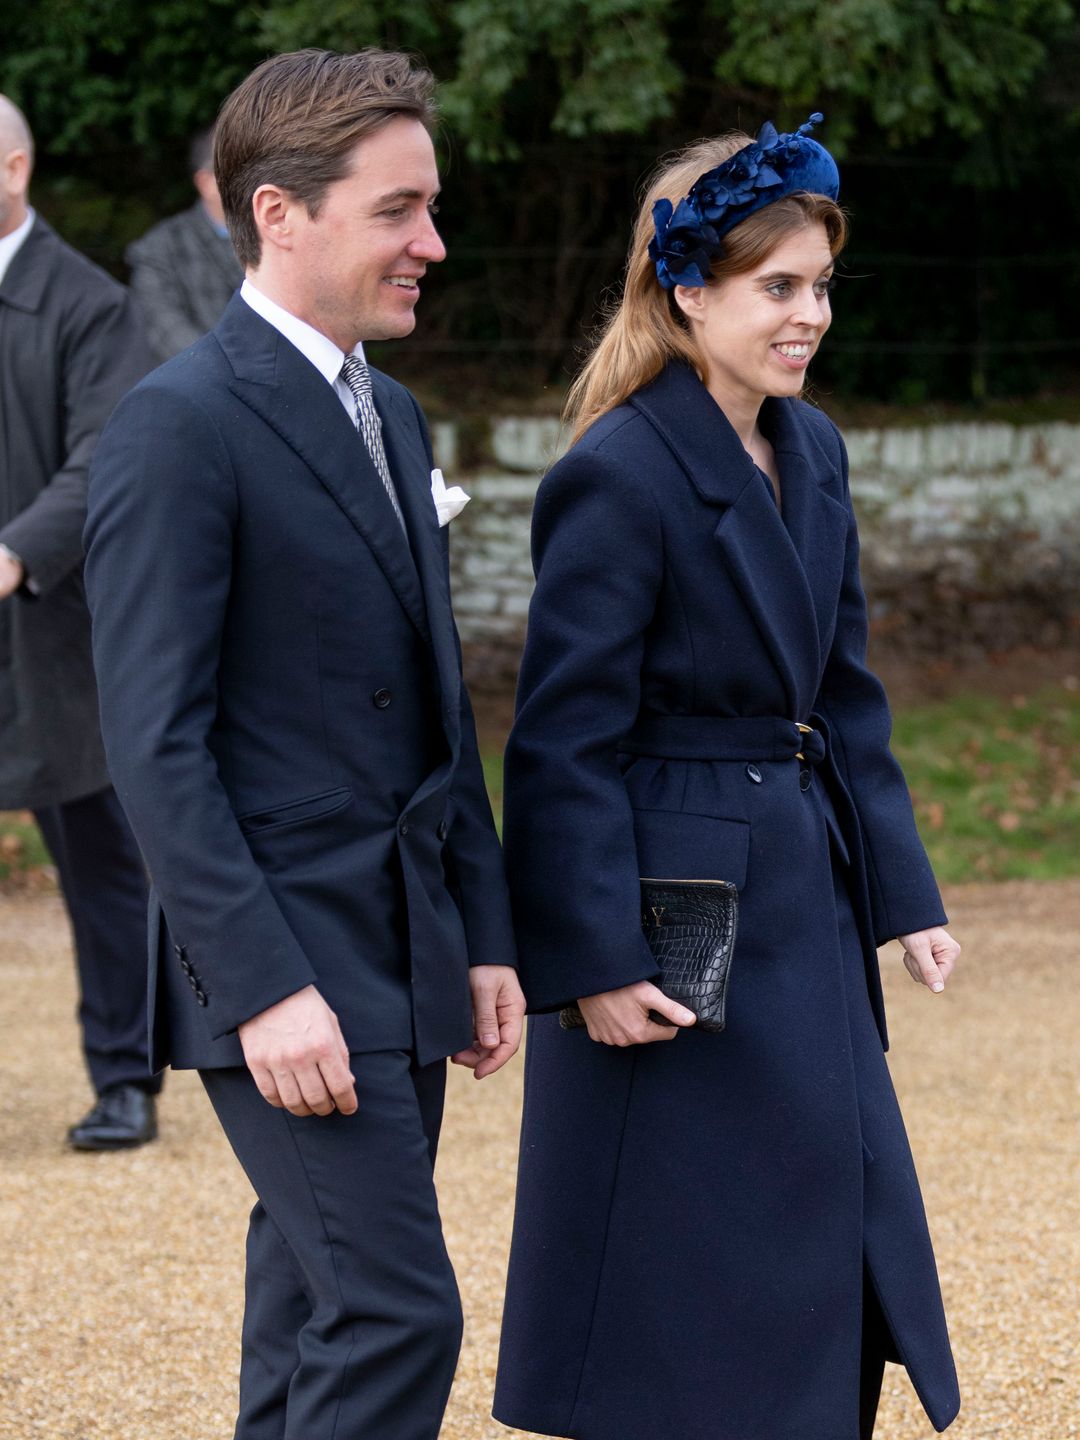 Princess Beatrice and her husband Edoardo Mapelli Mozzi attended the Christmas Day service at St Mary Magdalene Church